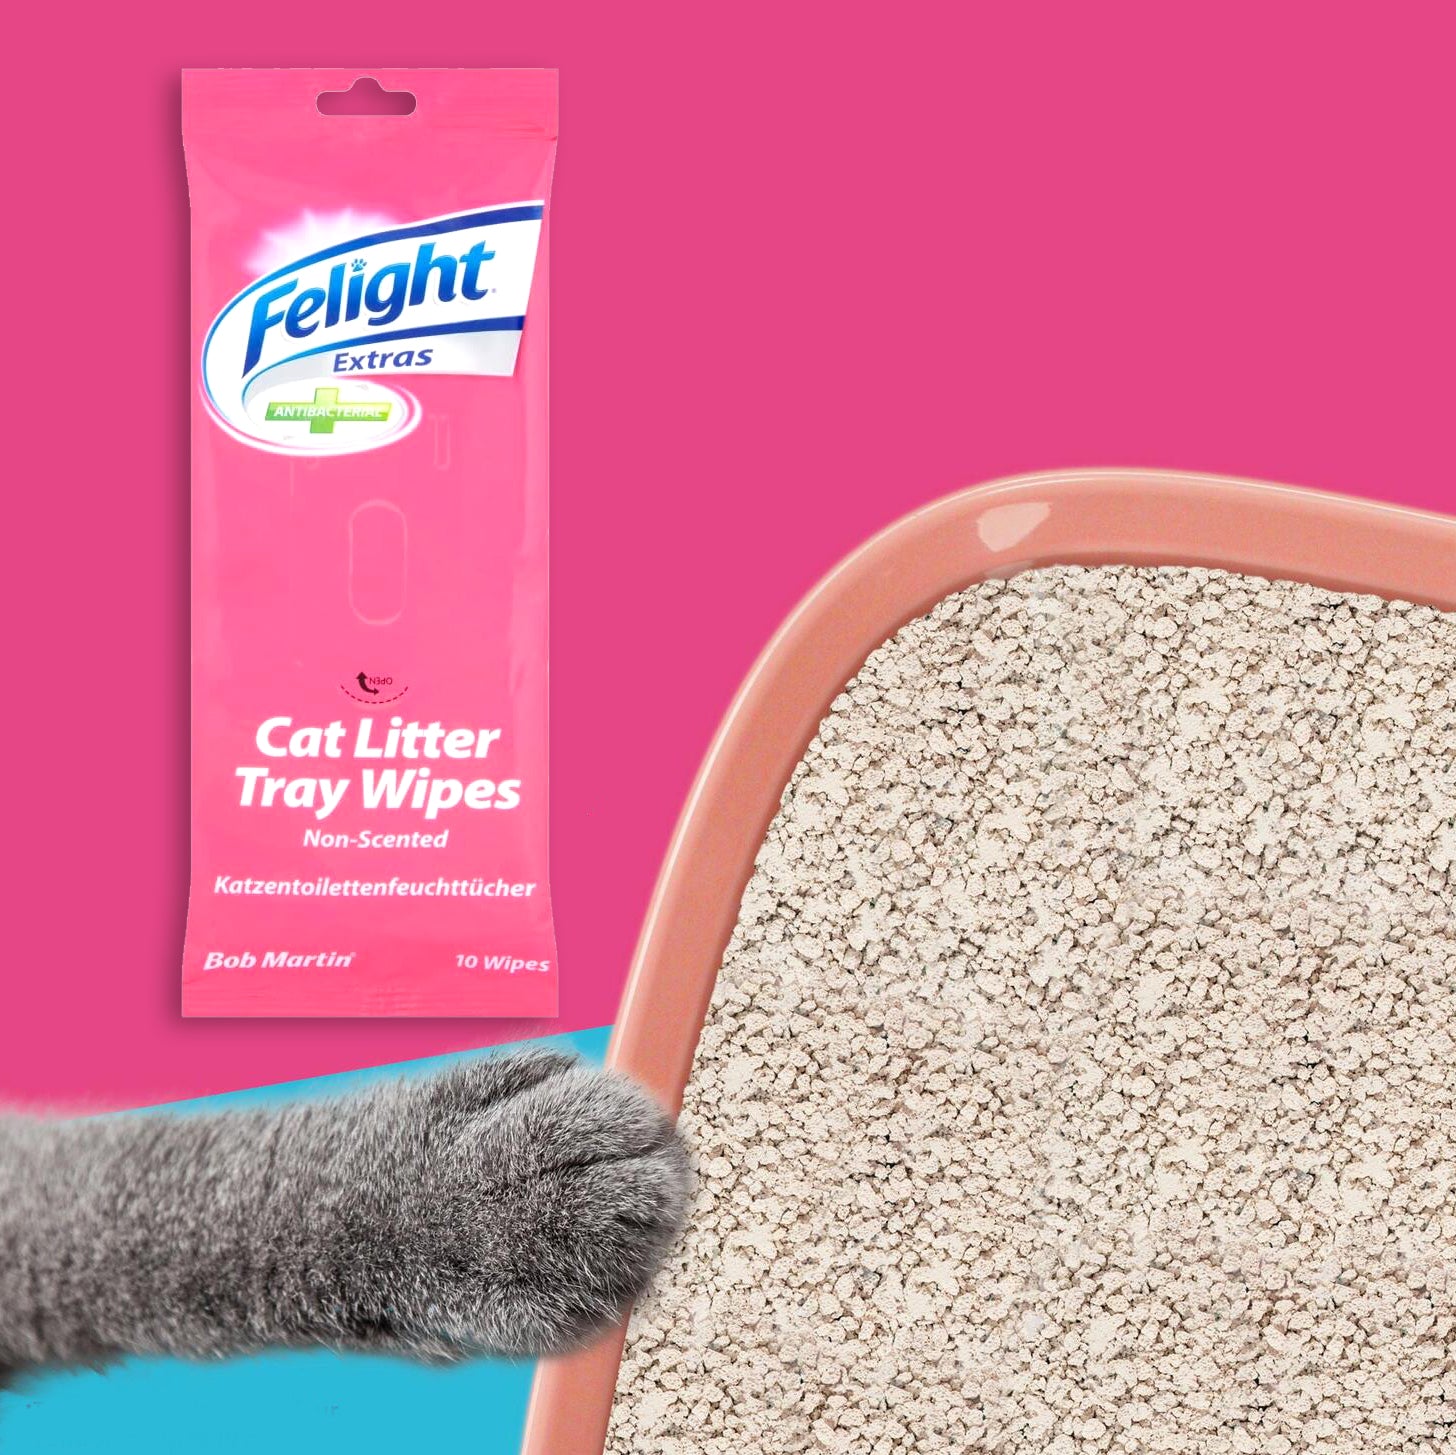 Unscented Cat Litter Tray Wipes - Pack of 10